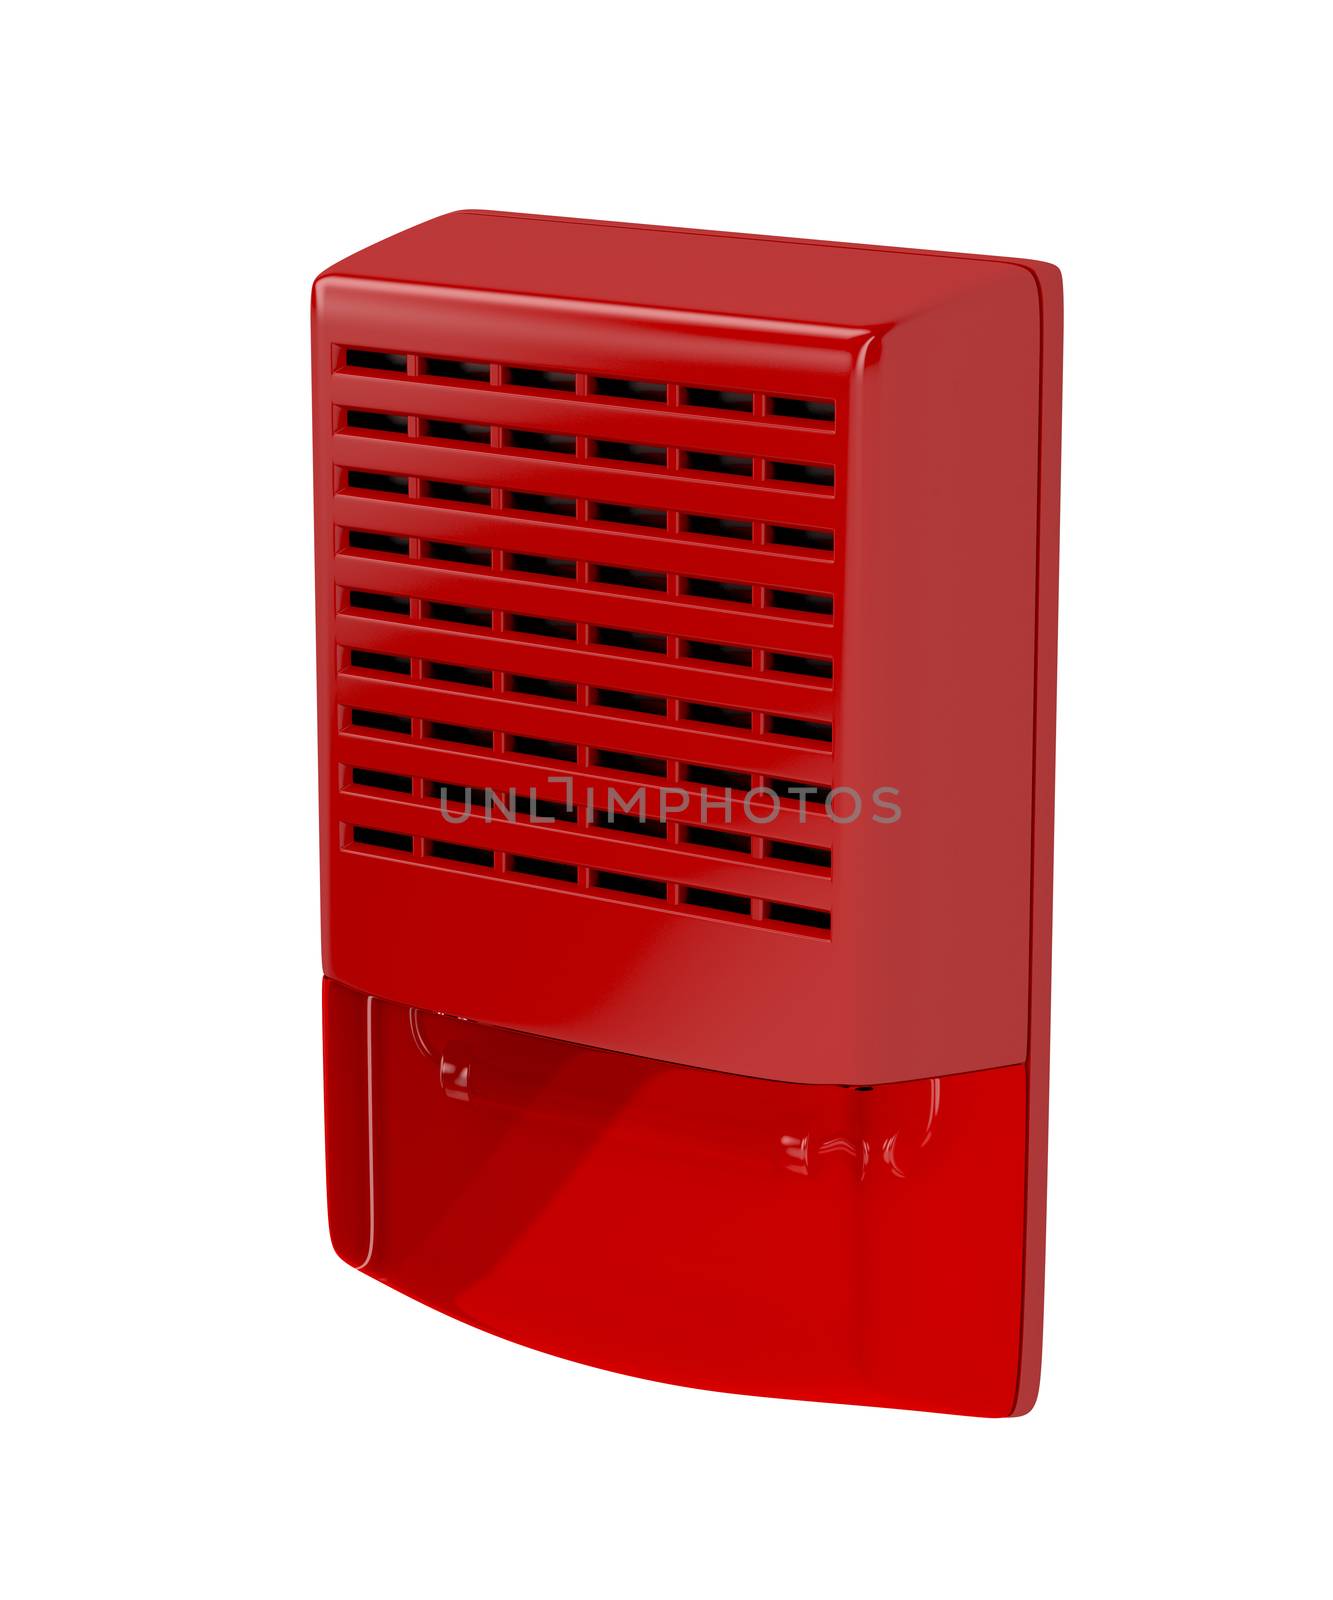 Fire alarm siren by magraphics